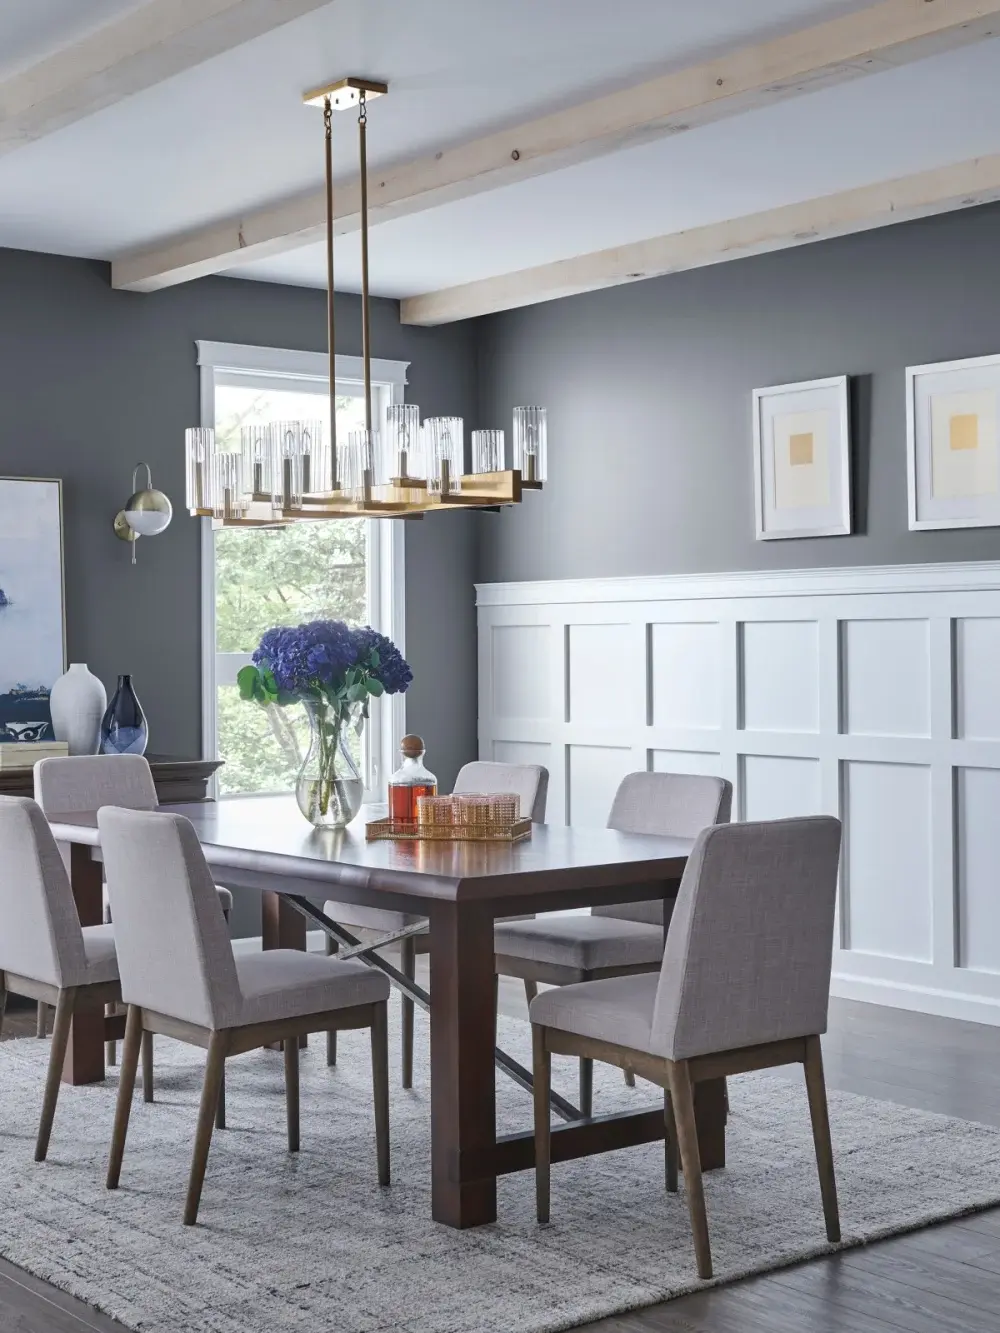 An elegant dining room with medium gray walls and white board and batten styled wainscot. In the center of the room is a simple wood dining table surrounded by chairs with a large area rug underneath.